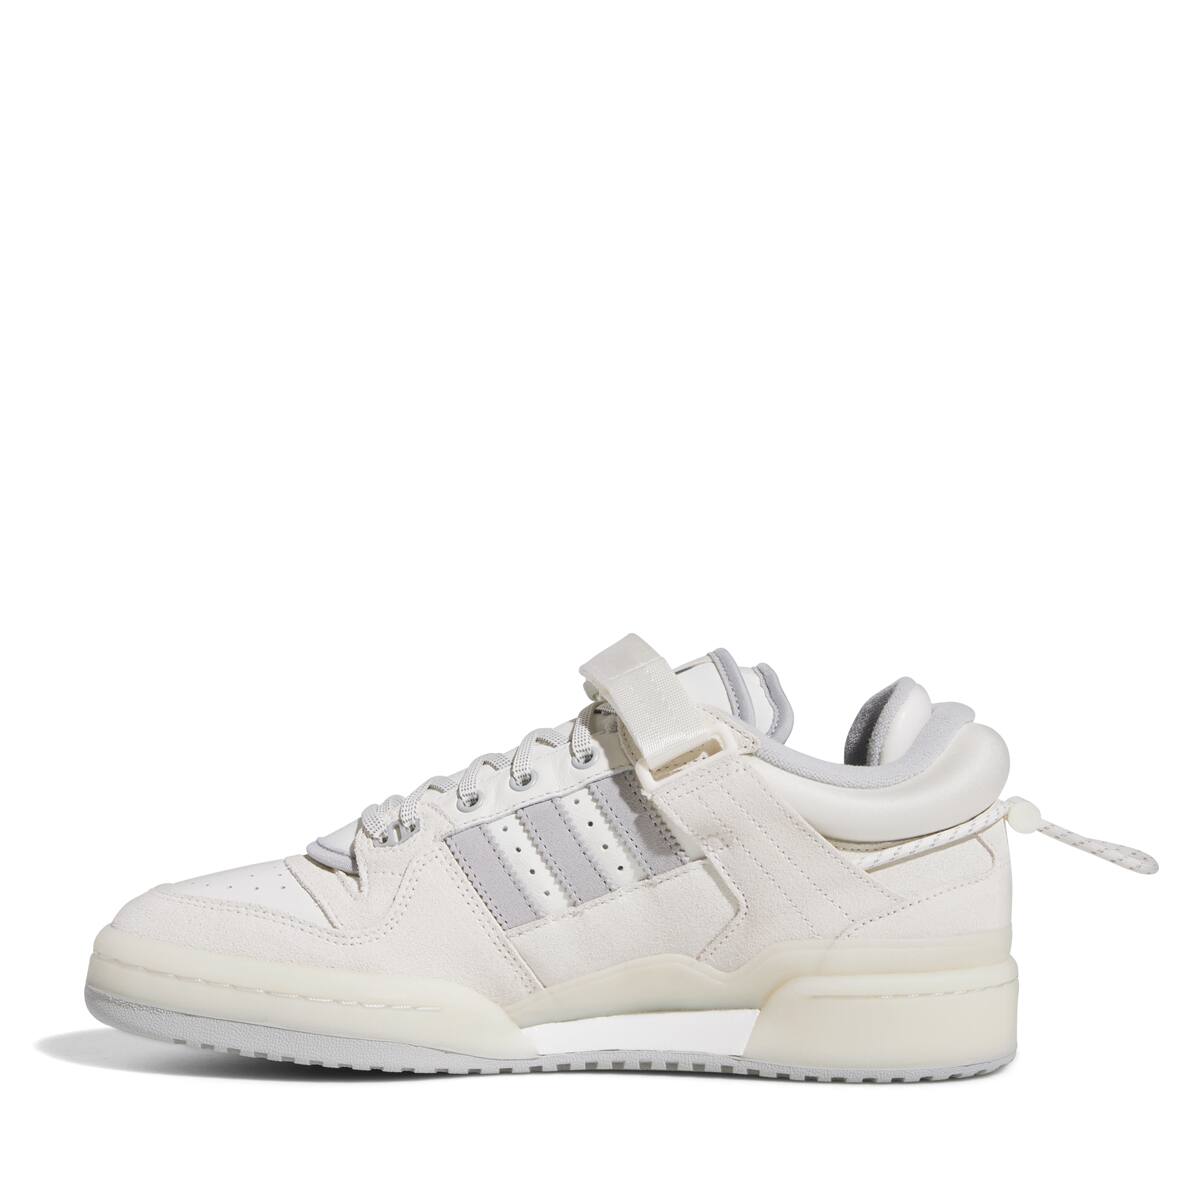 adidas BAD BUNNY FORUM CLOUD WHITE/CLEAR ONIX/CHALK WHITE 23SS-S